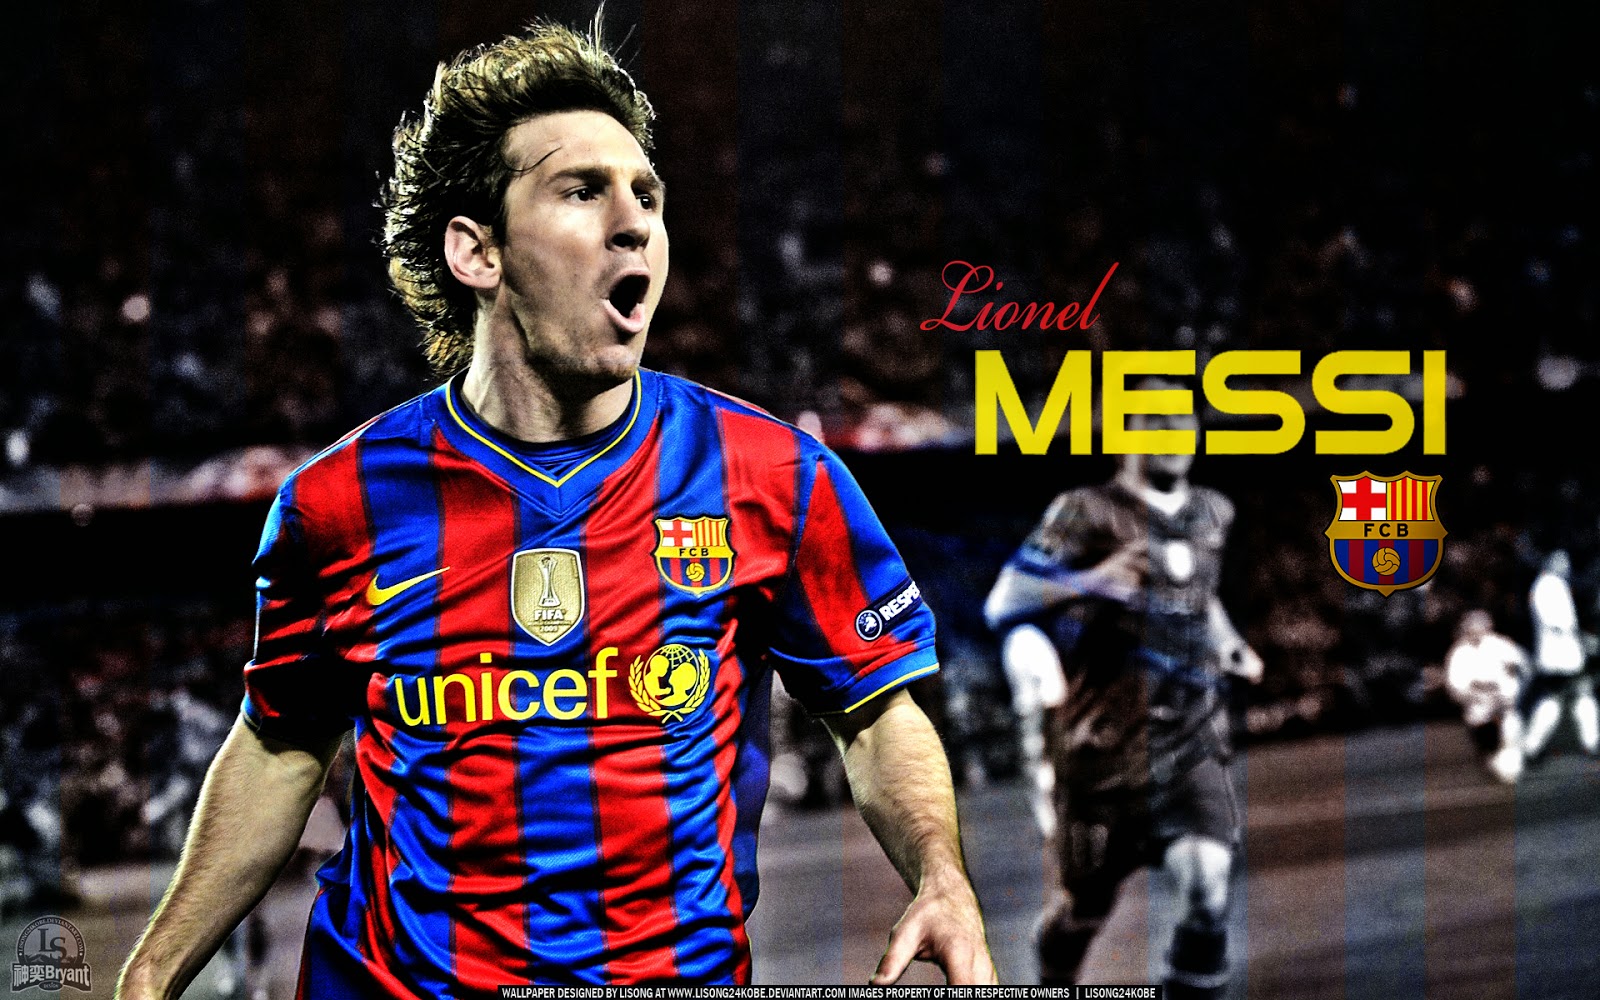 Lionel Messi New HD Wallpapers 2014 2015 1600x1000